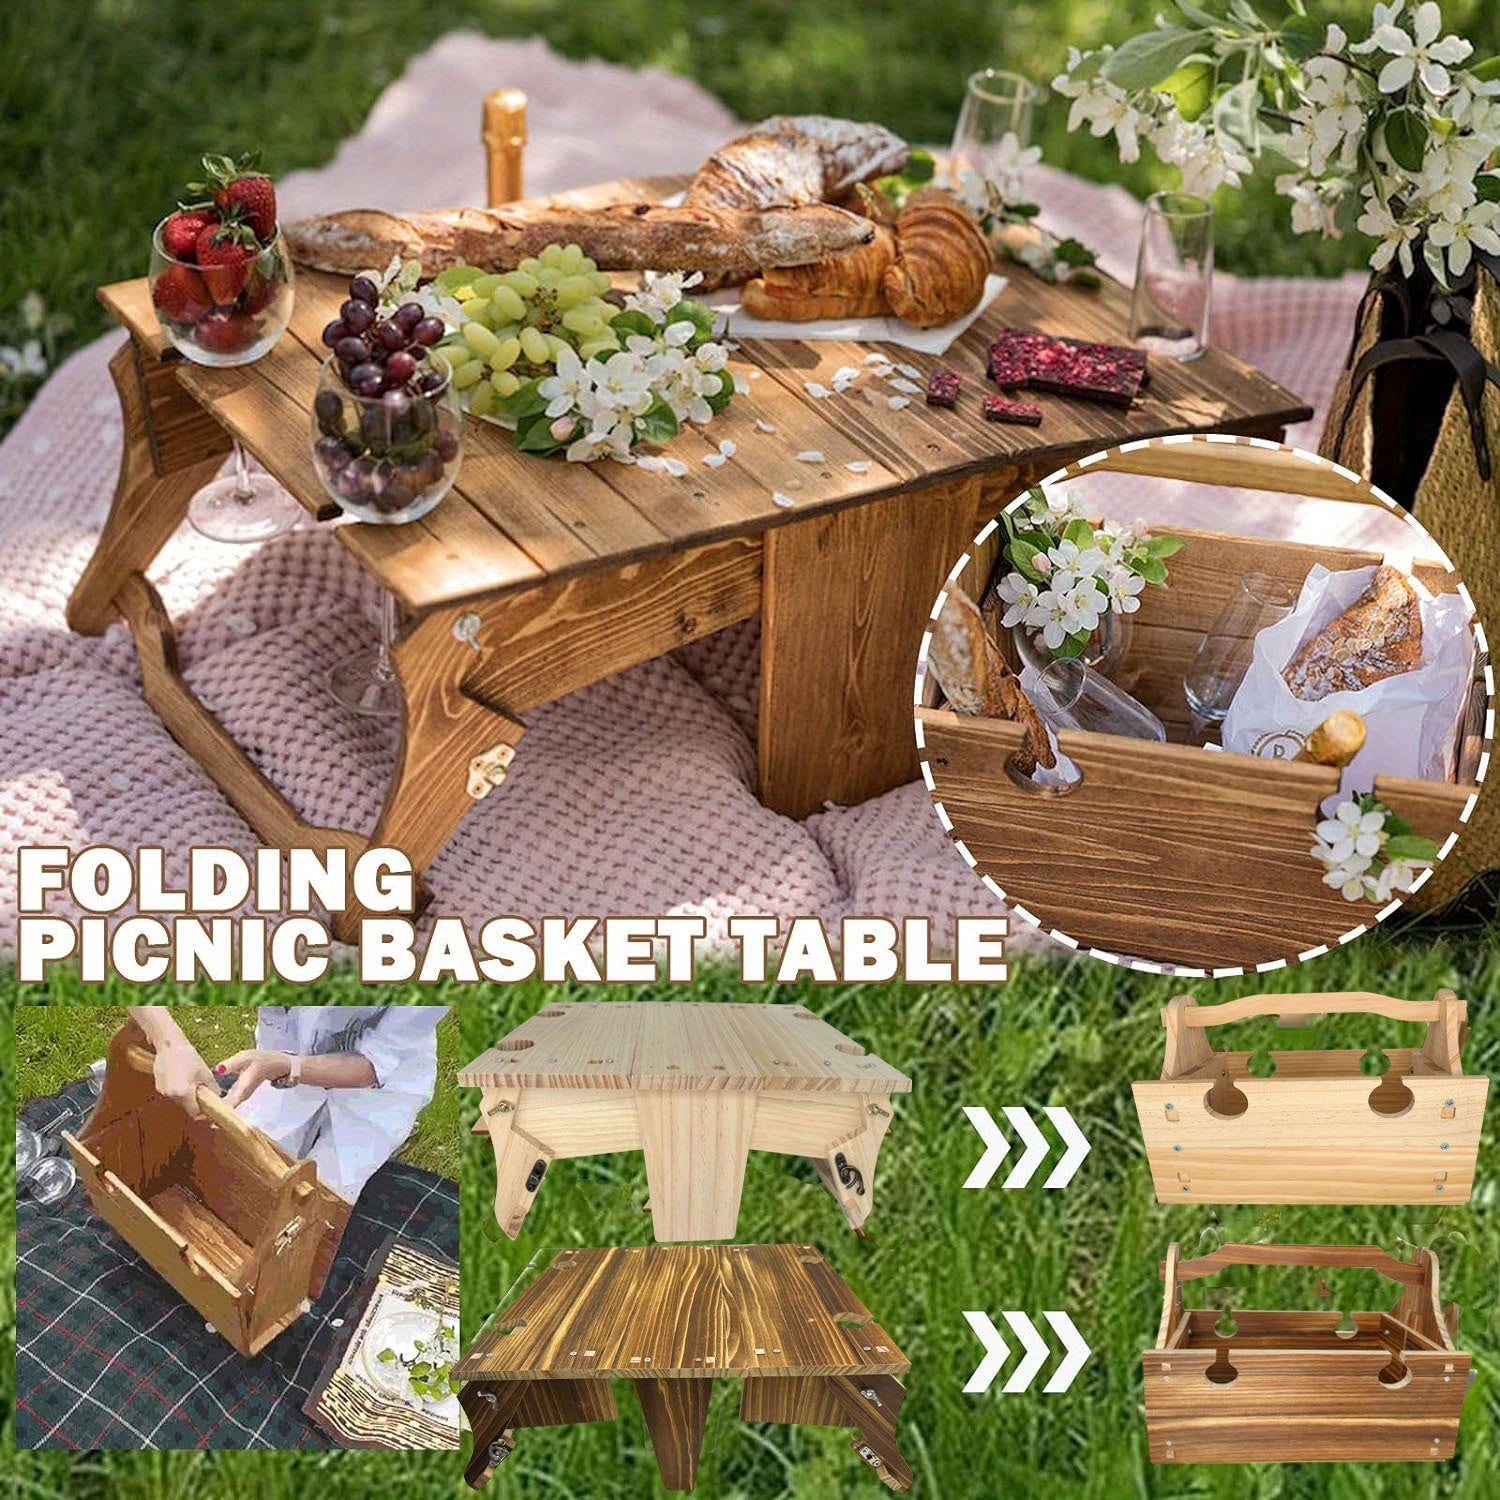 Wooden Folding Picnic Table, Wooden Outdoor Folding Picnic Basket Table, With Wine Glass Holder, 2-in-1 Picnic Table Convertible Storage Wooden Basket For Picnic Outdoor On The Beach Park ShopOnlyDeal